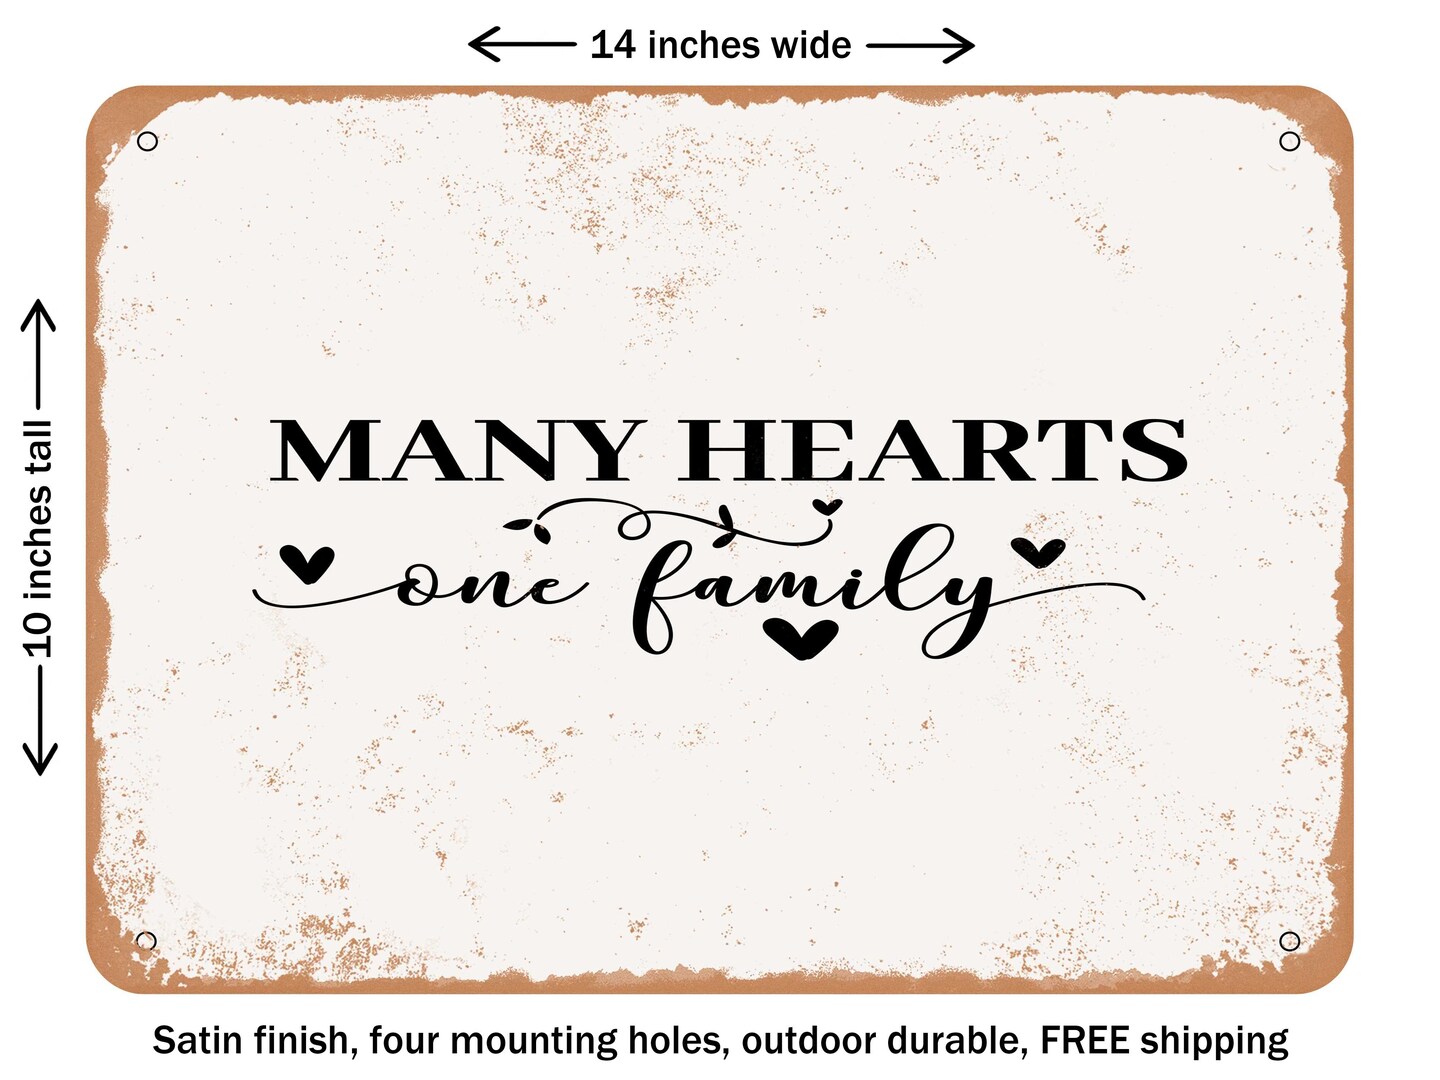 DECORATIVE METAL SIGN - Many Hearts One Family - Vintage Rusty Look